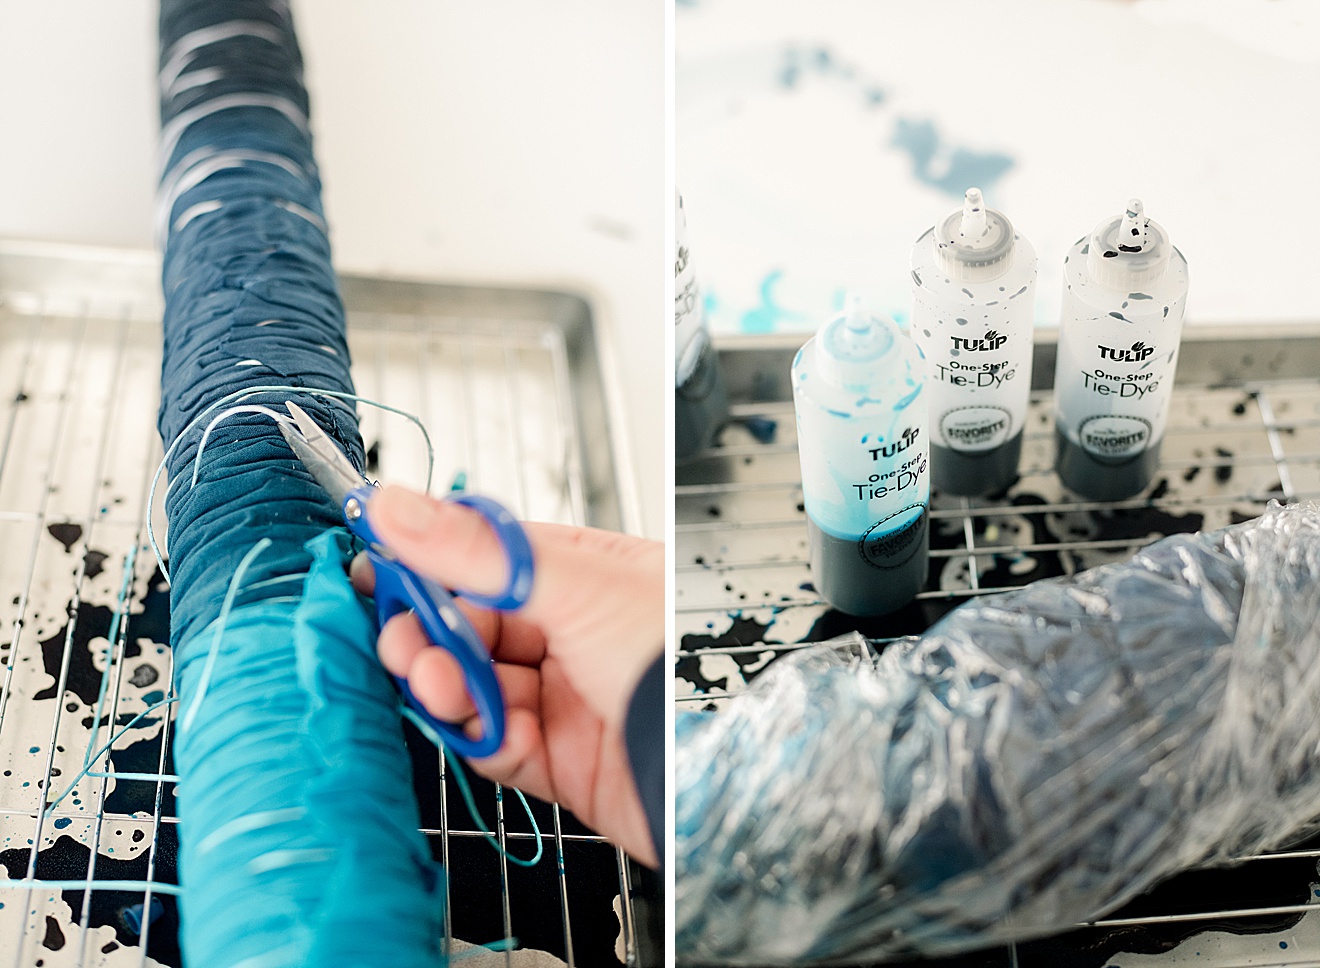 Shibori inspired footstool recovering, how to recover a footstool, shibori inspired tie dye DIY, Shibori inspired dye, how to shibori dye a footstool